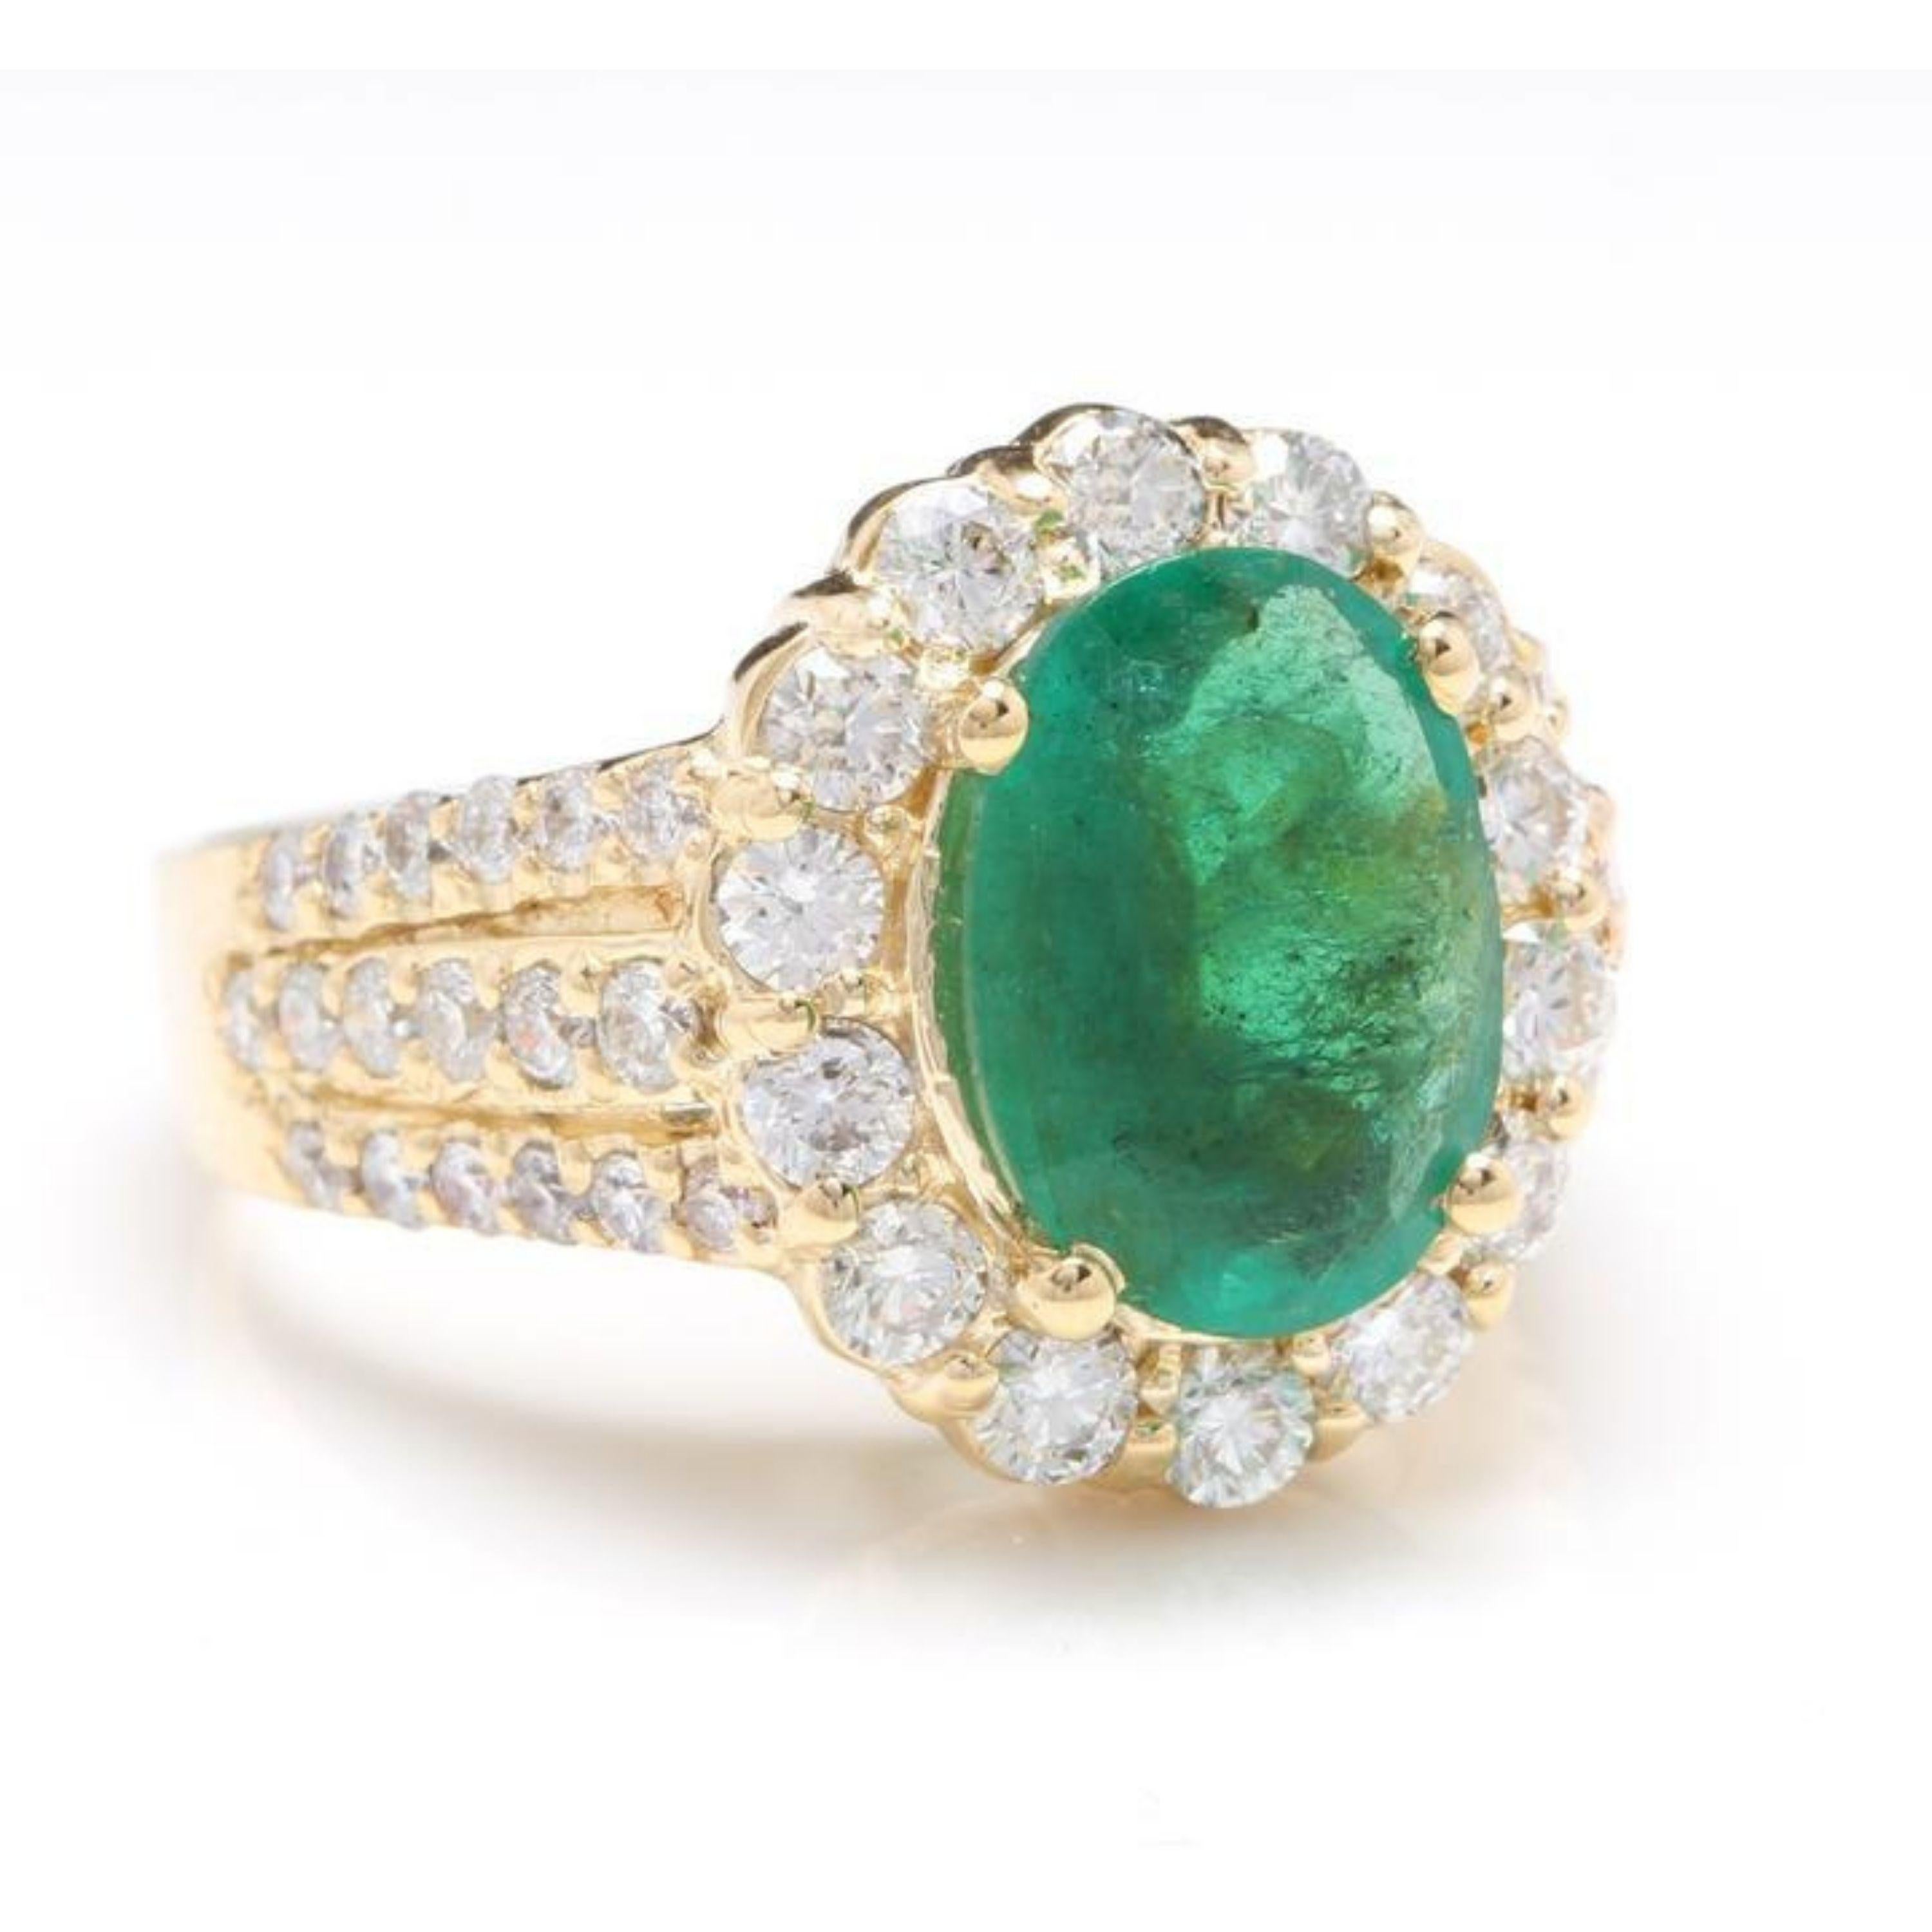 3.88 Carats Natural Emerald and Diamond 14K Solid Yellow Gold Ring

Total Natural Oval Cut Emerald Weight is: Approx. 2.38 Carats (transparent )

Emerald Measures: Approx. 10.00 x 8.00mm

Natural Round Diamonds Weight: Approx. 1.50 Carats (color G-H